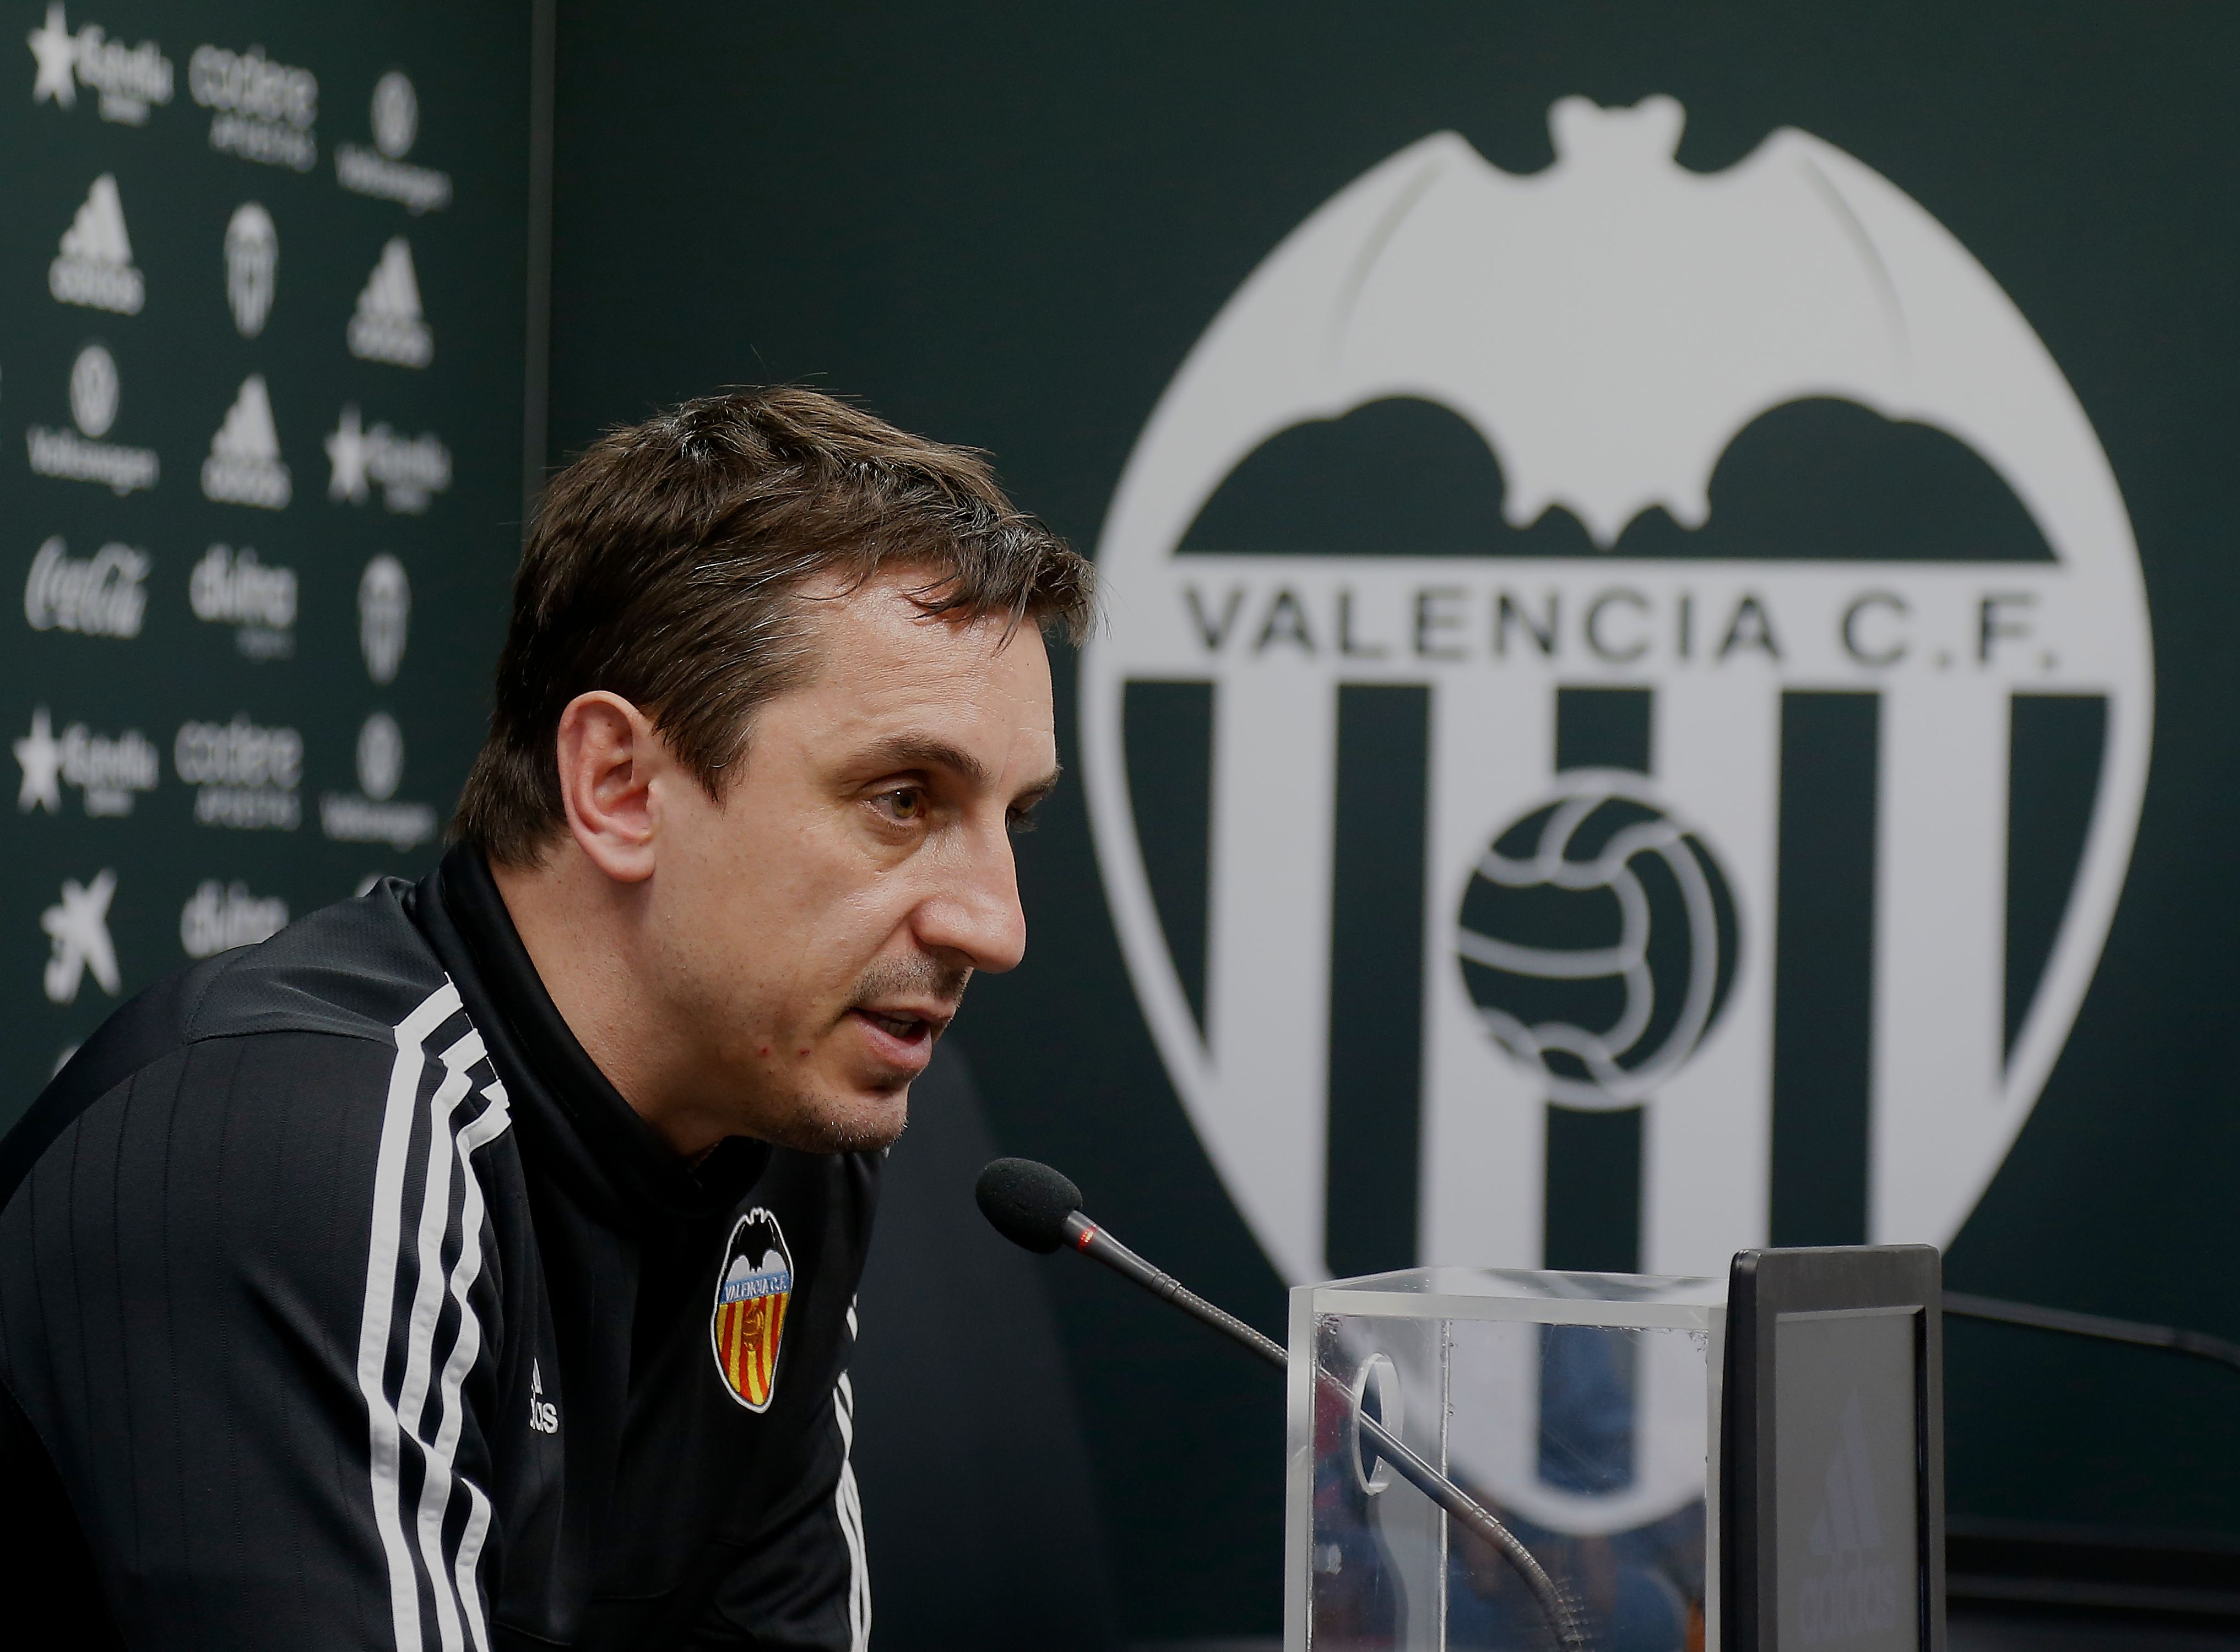 VALENCIA, SPAIN - FEBRUARY 09: Gary Neville manager of Valencia CF faces the media during a press conference ahead of Wednesday's Copa del Rey Semi Final, second leg match between Valencia CF and FC Barcelona at Paterna Training Centre on February 9, 2016 in Valencia, Spain. (Photo by Manuel Queimadelos Alonso/Getty Images)